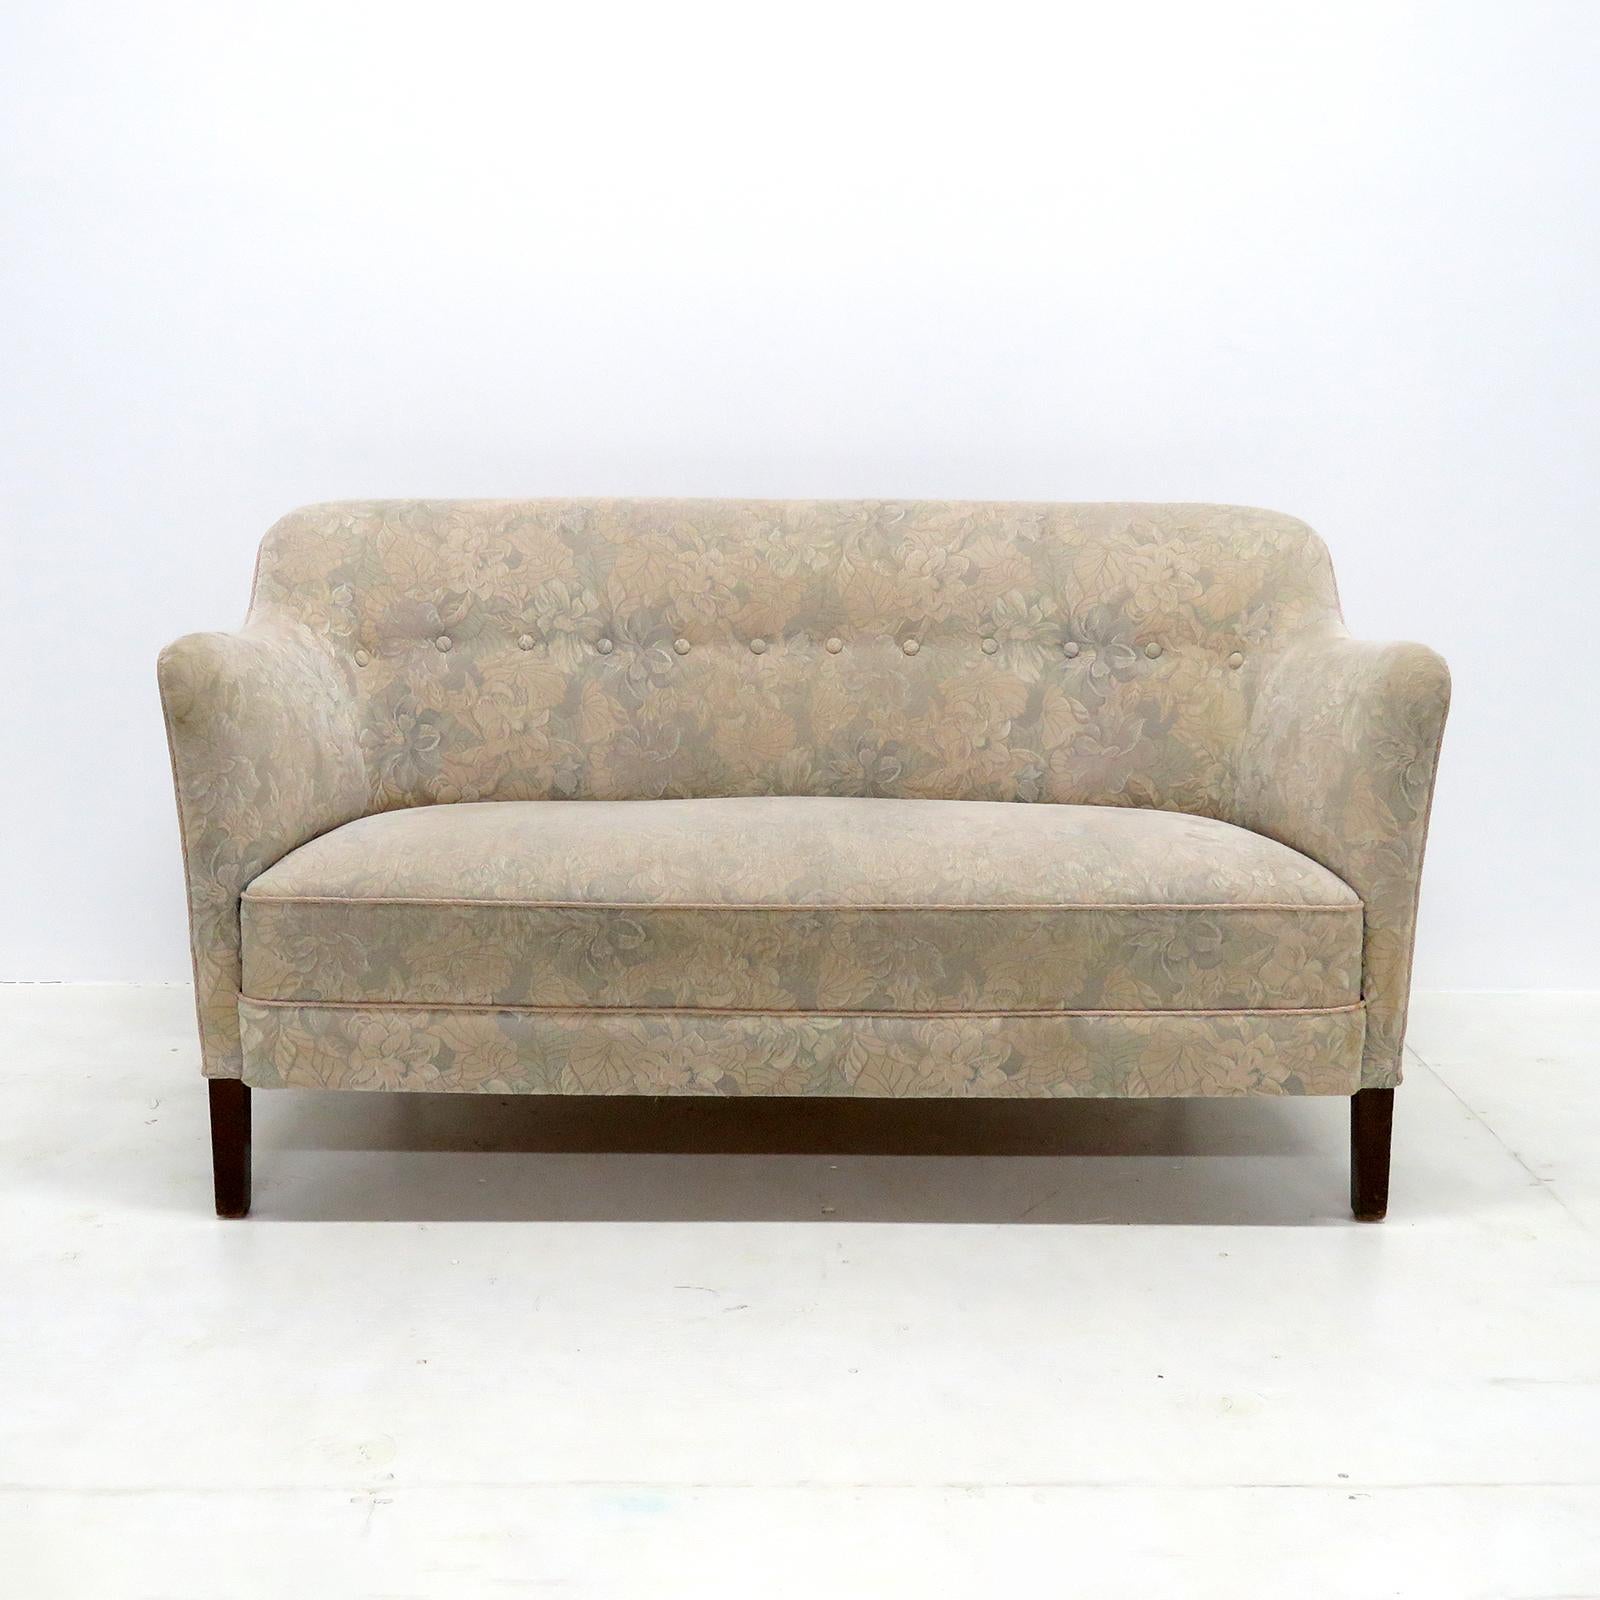 Wonderful Danish modern settee from the 1940s, dark stained beech legs with a multicolored, floral themed upholstered and tufted body.